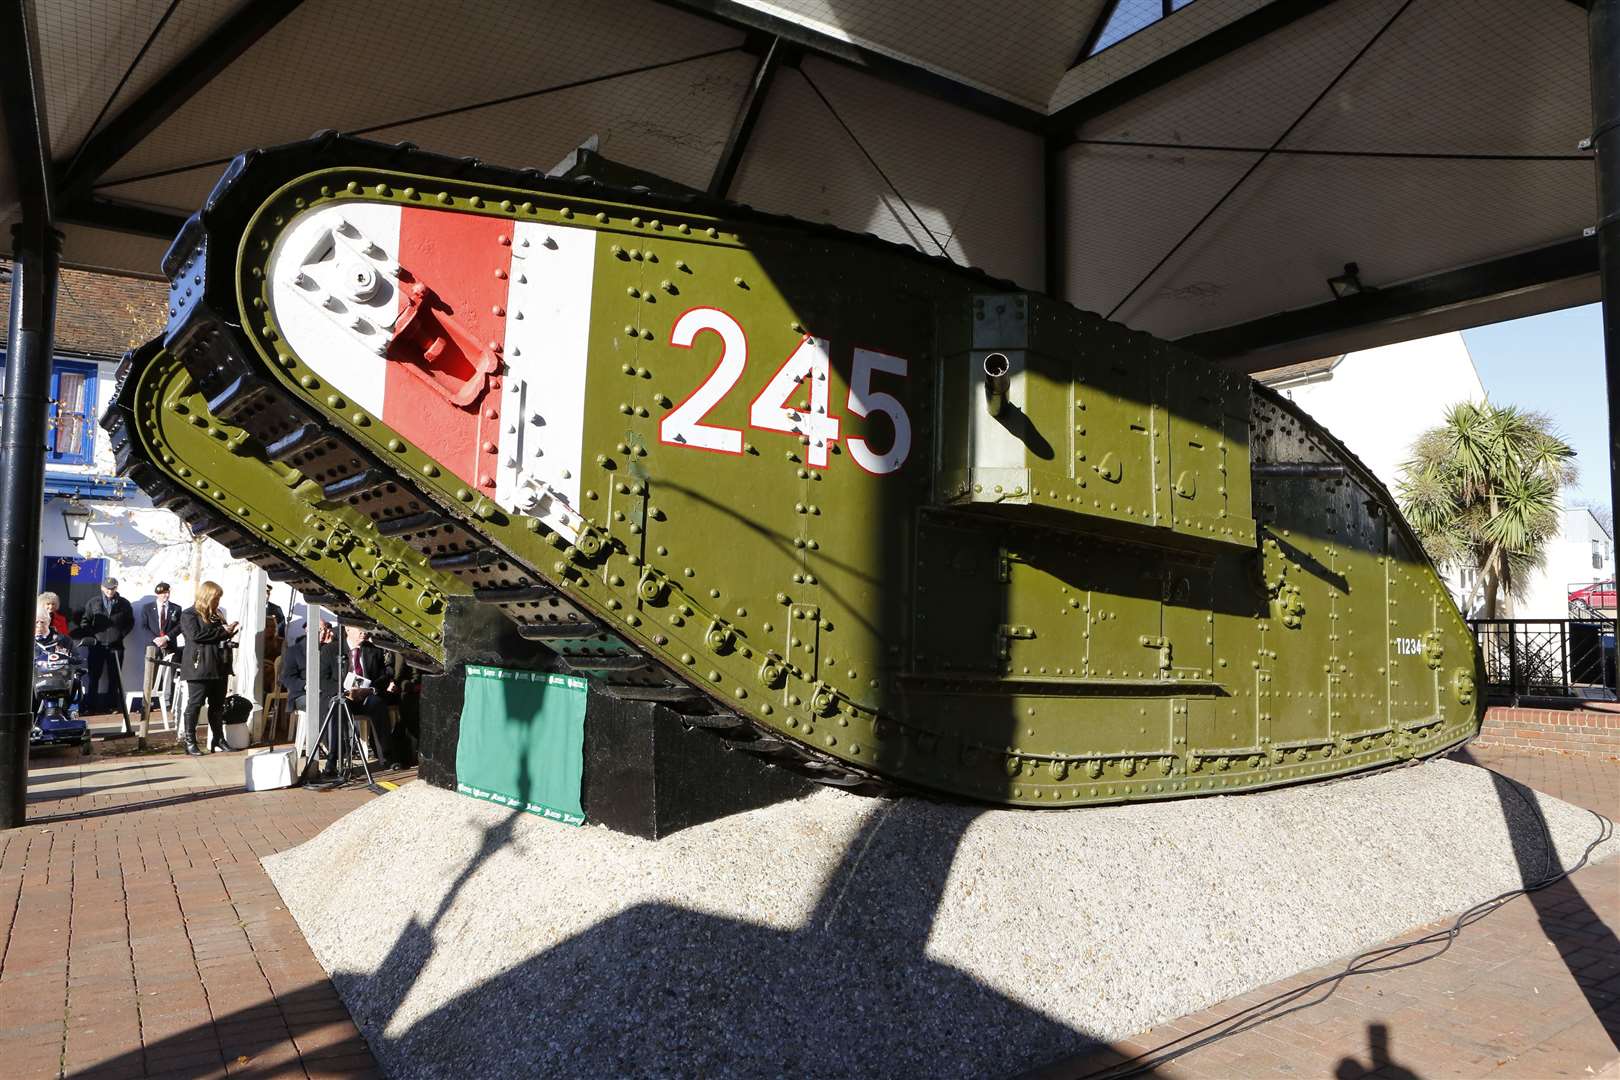 The tank could collapse in under 20 years, according to a survey